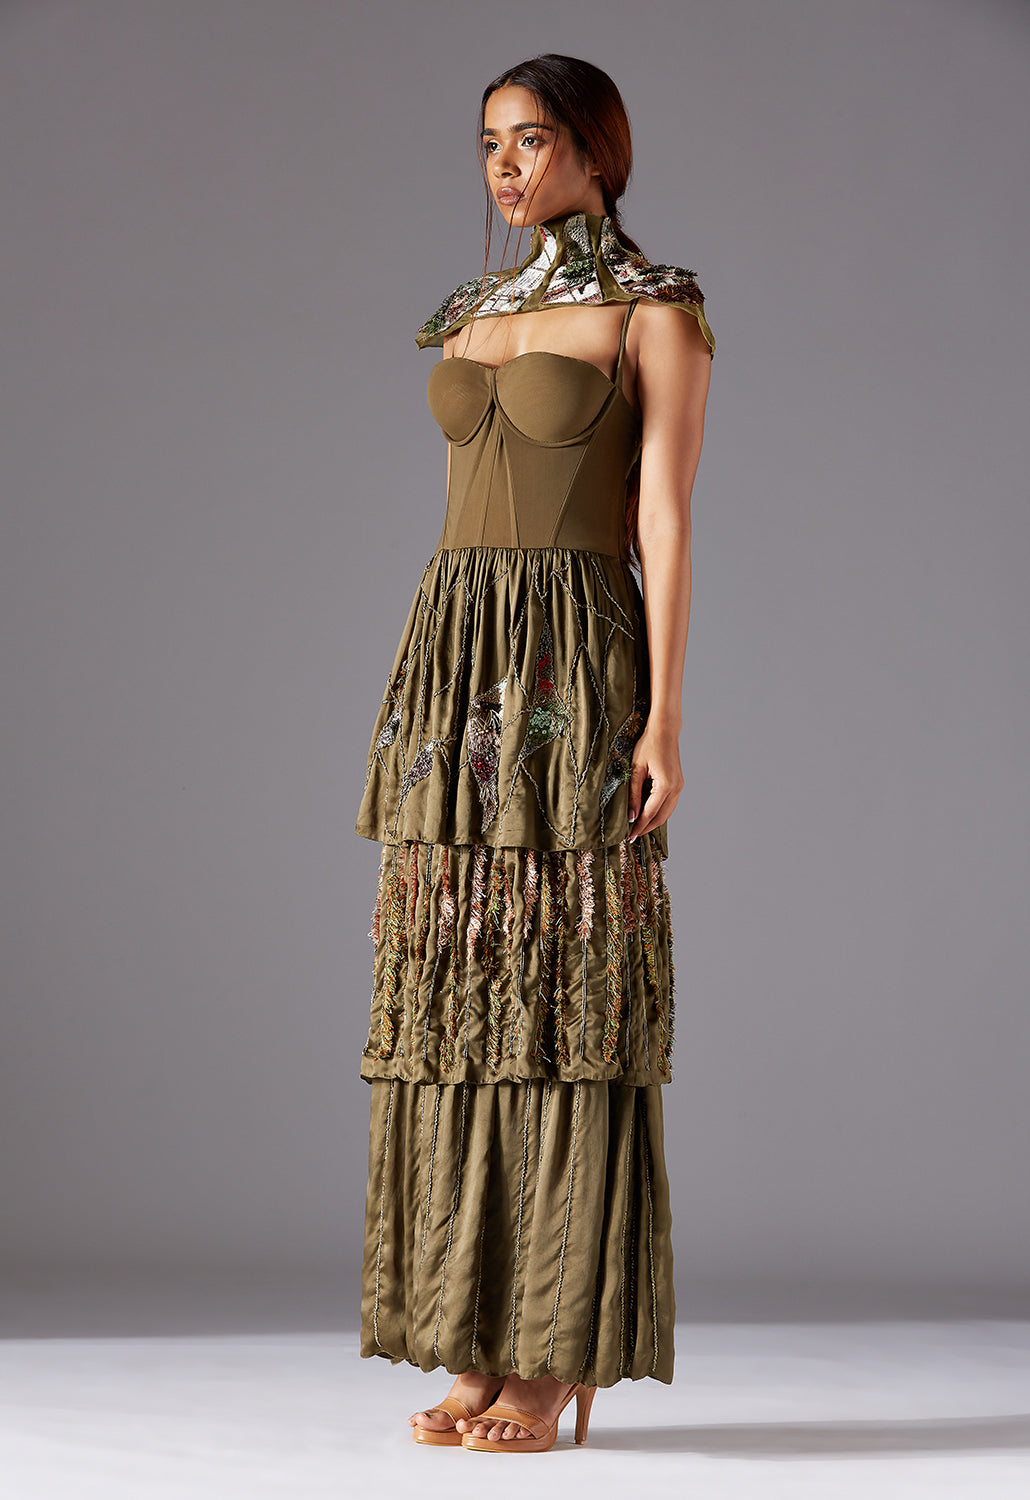 Topiary Corset Gown